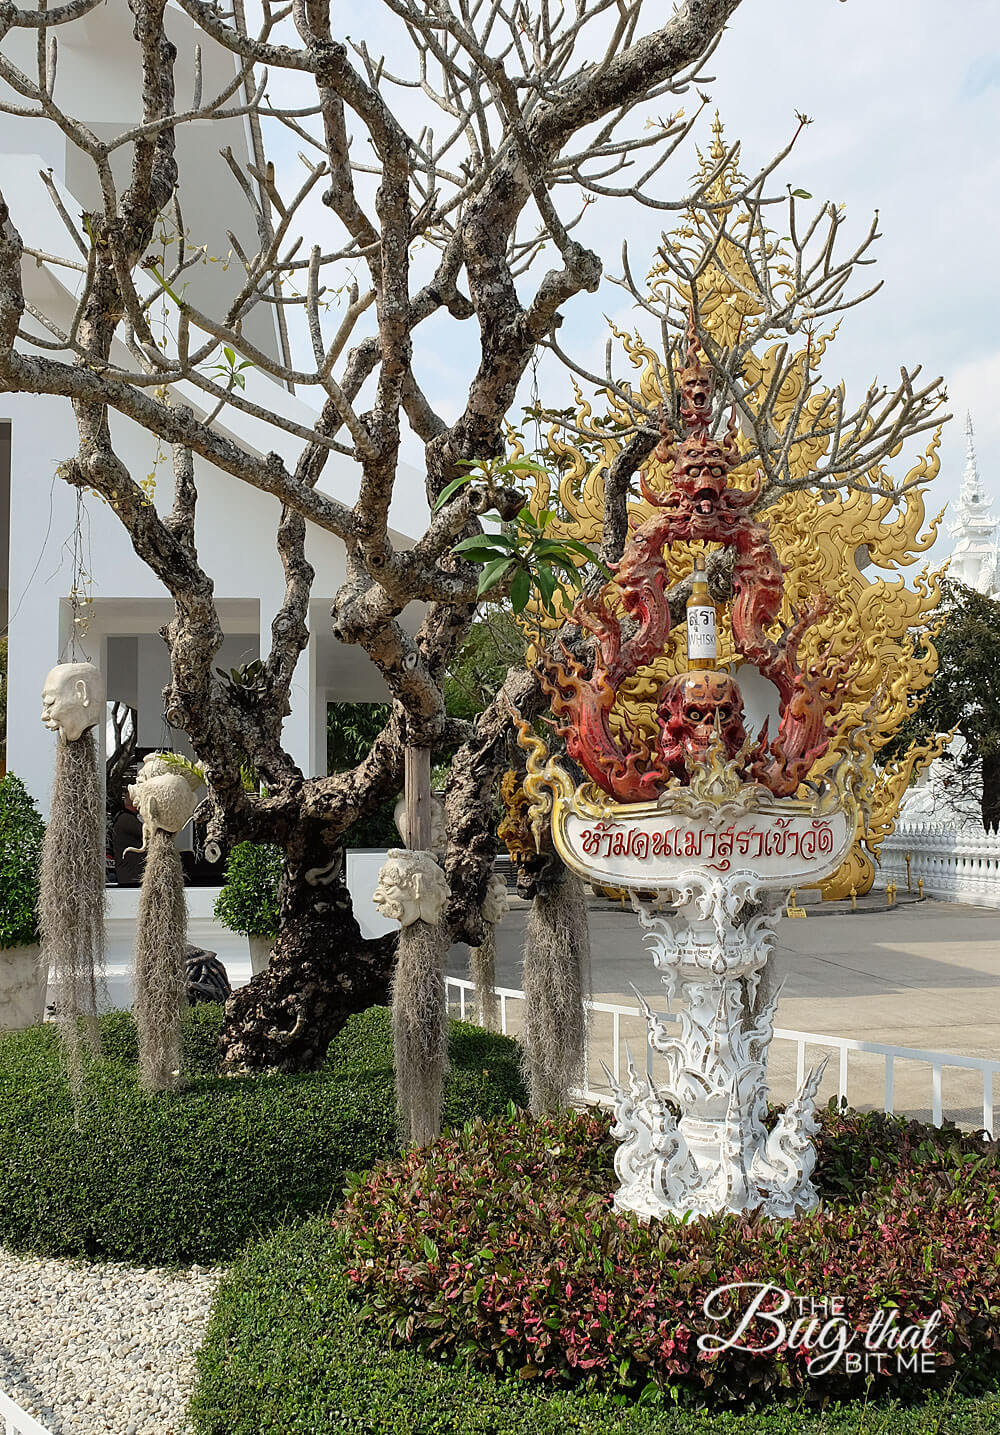 The White Temple, Wat Rong Khun 